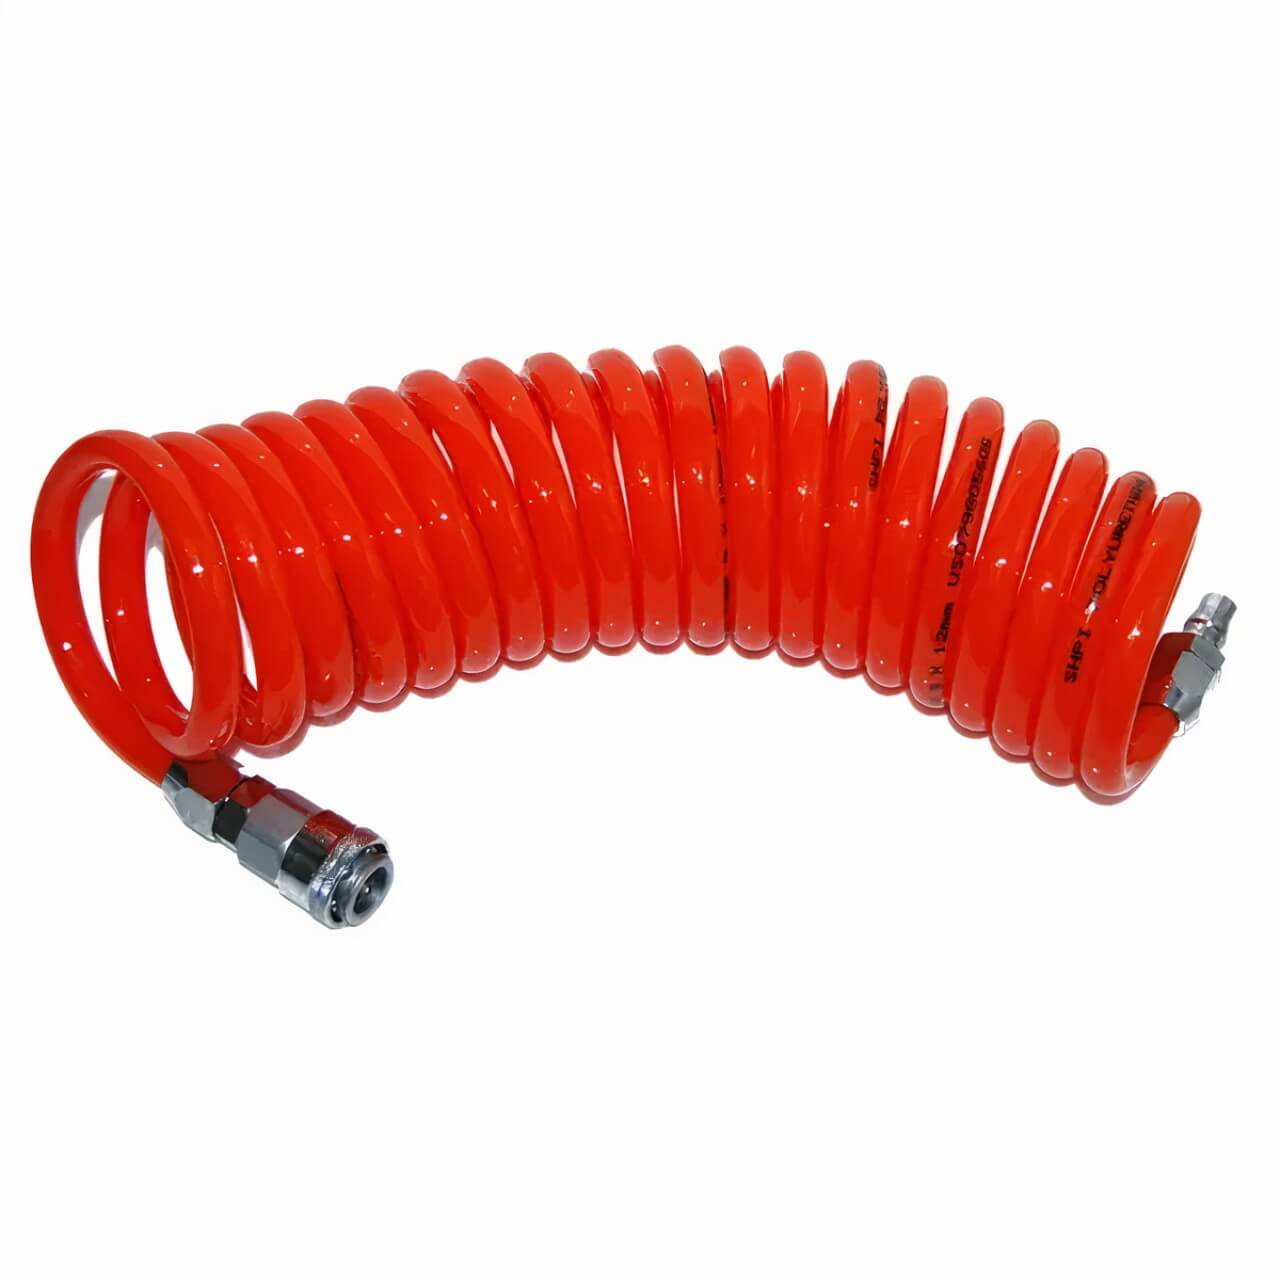 12mm Recoil Air Hose x 10m inc Nitto Style Couplings